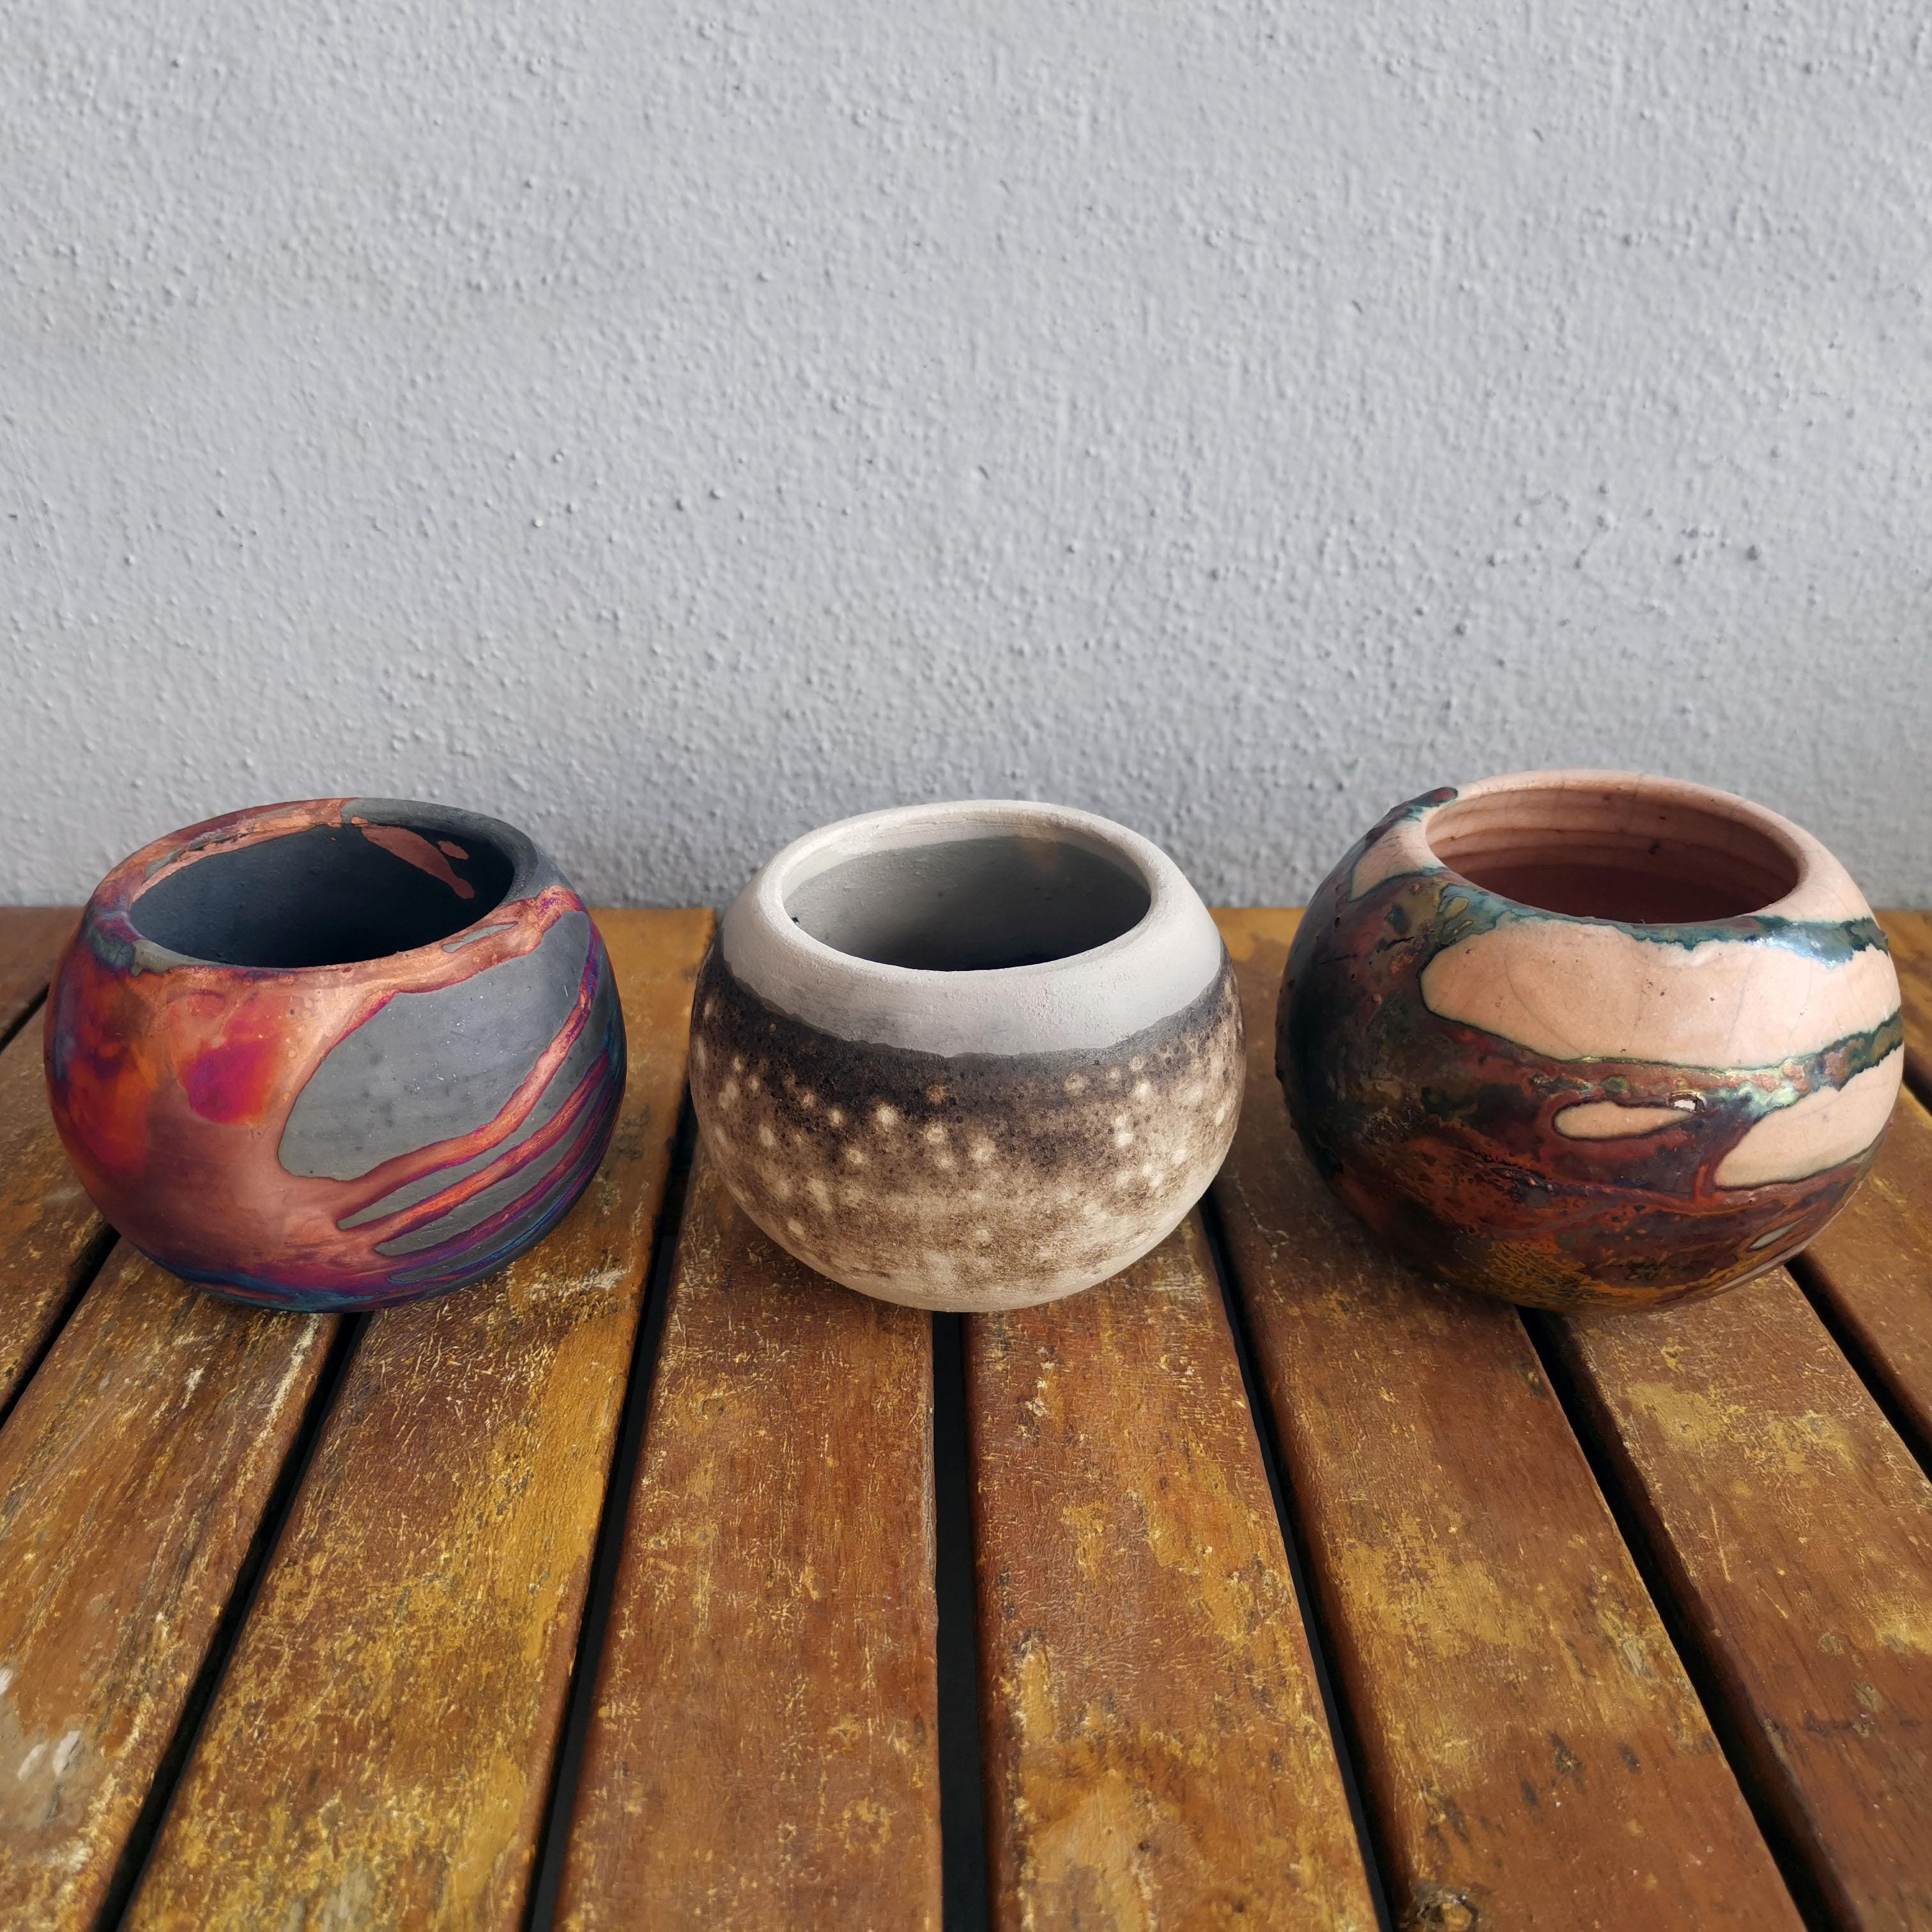 Tsuchi ( 土 )  - Earth

*Plants are not included in this purchase

Our Tsuchi pot is named after the medium it holds ; Earth. This pot is double sealed to prevent moisture from seeping into the ceramic and created with up to 3 holes at the bottom for